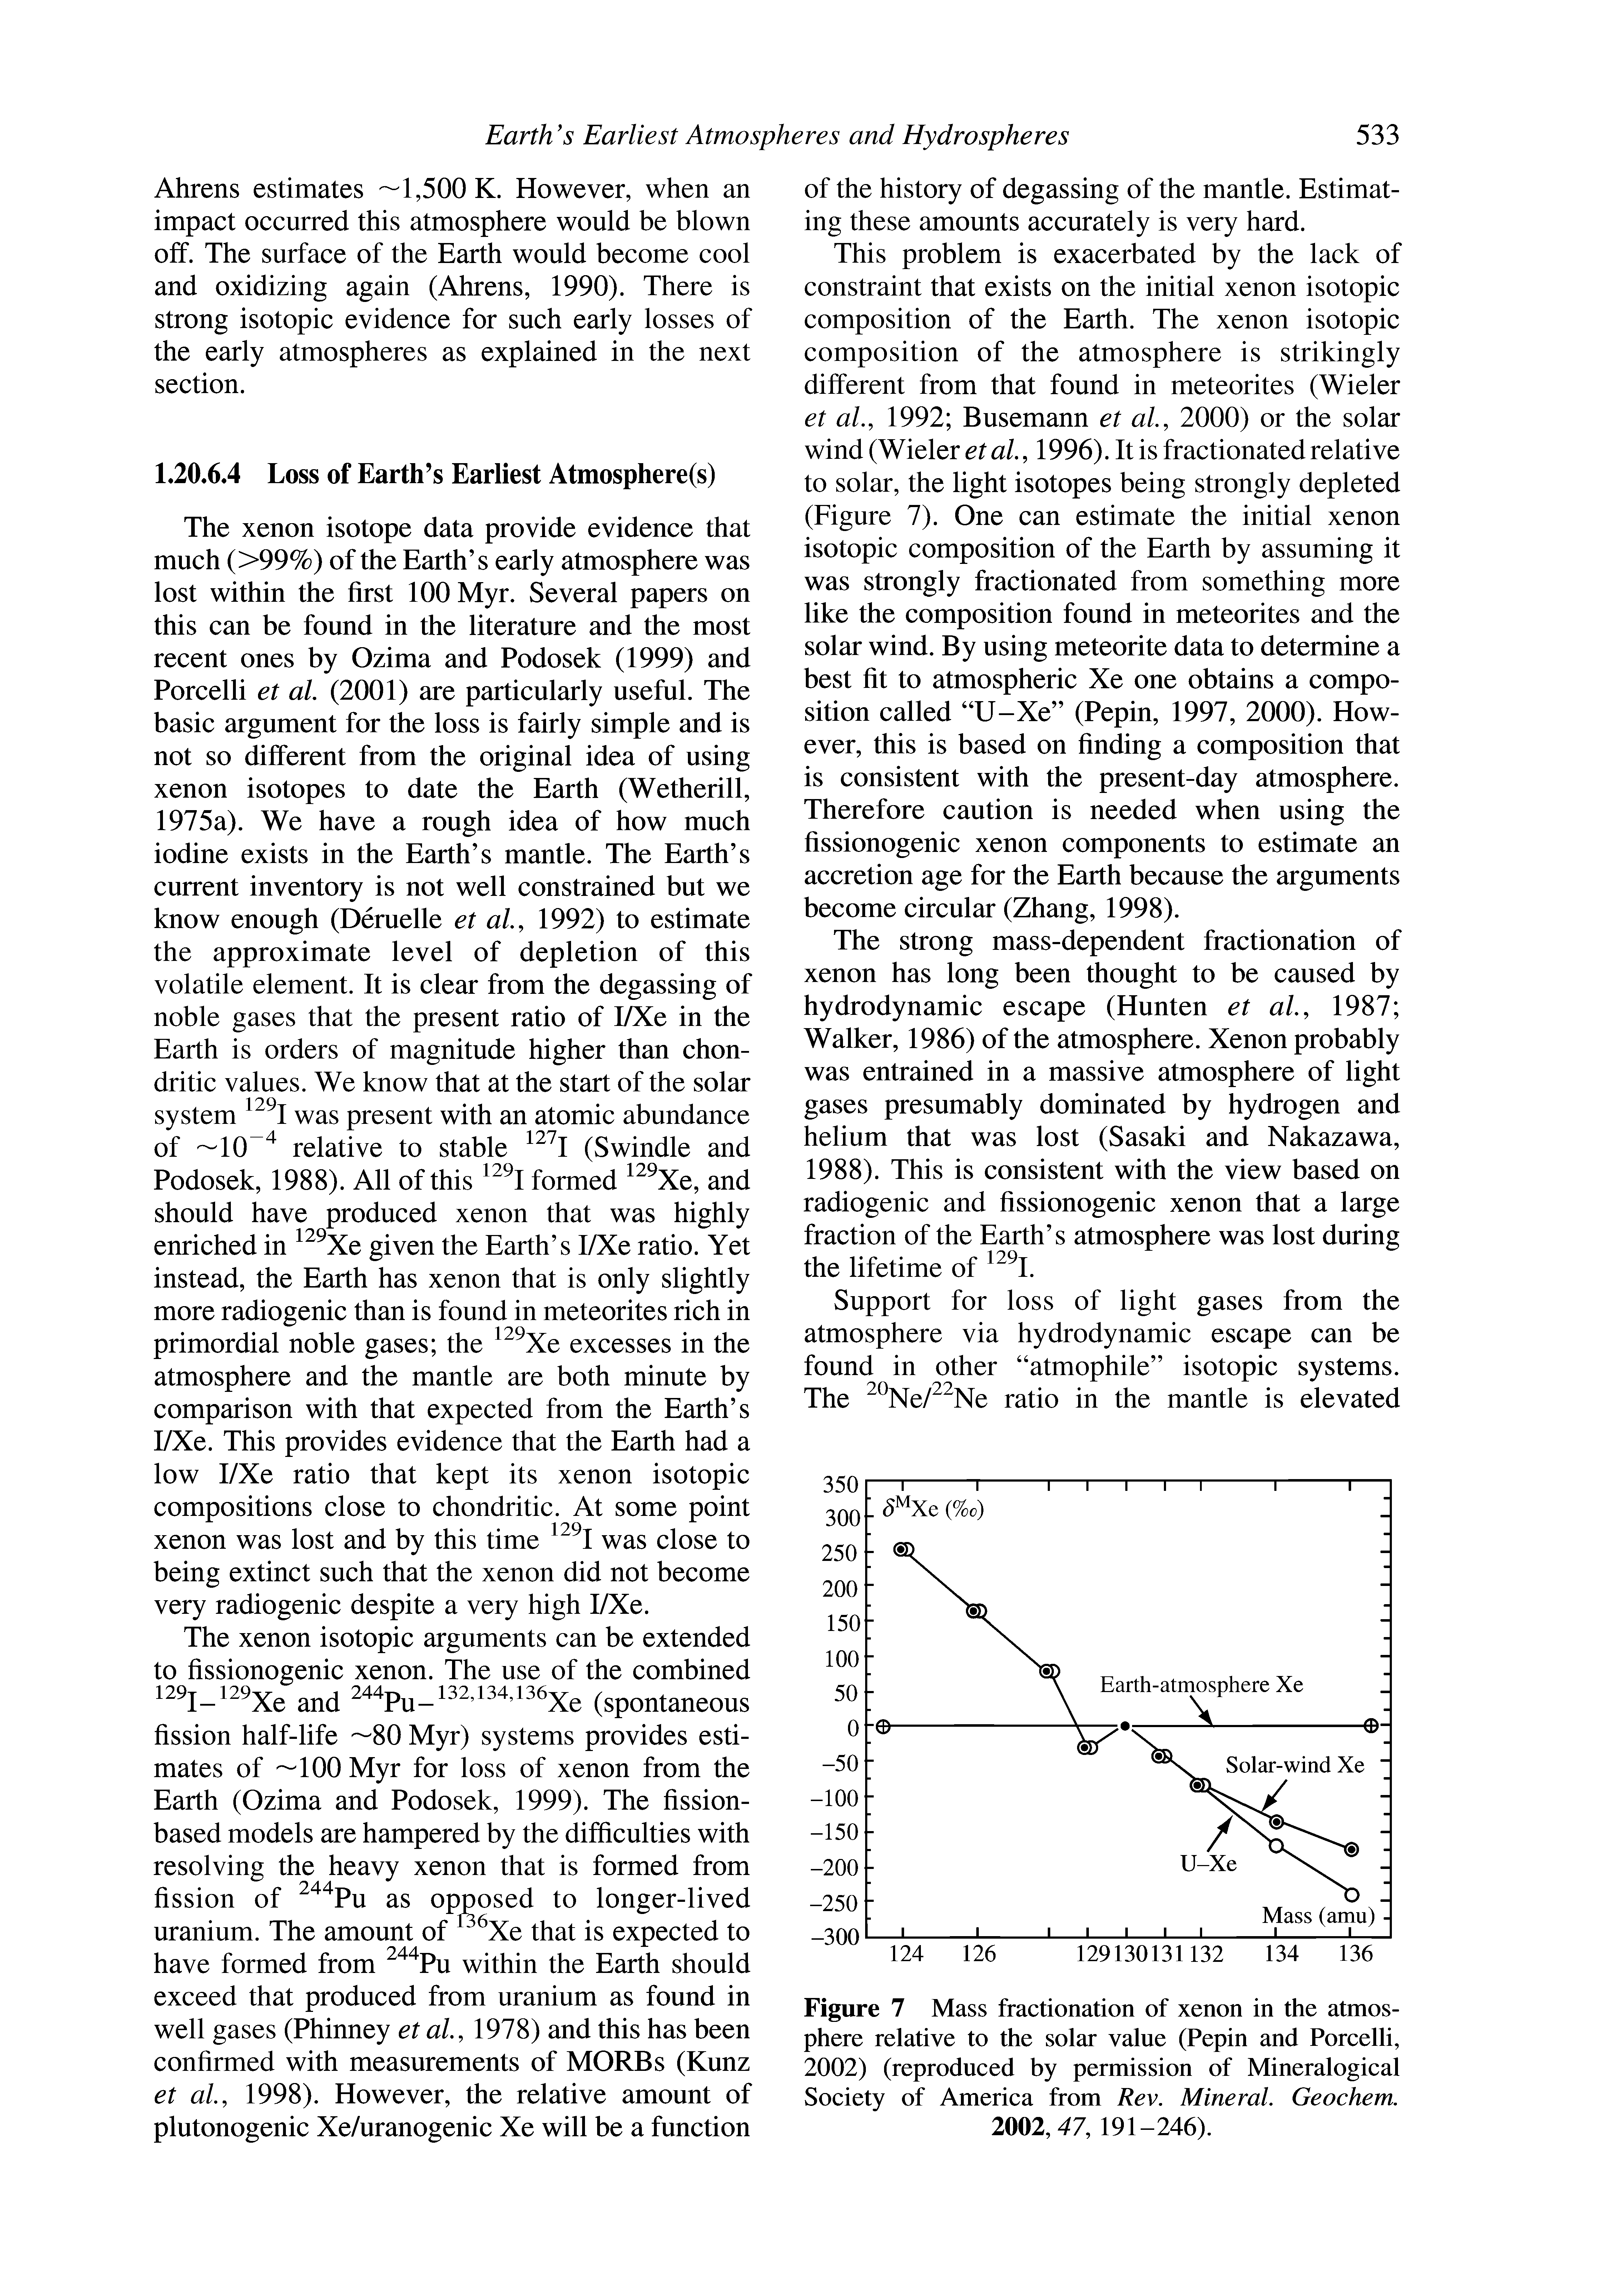 Figure 7 Mass fractionation of xenon in the atmosphere relative to the solar value (Pepin and Porcelli, 2002) (reproduced by permission of Mineralogical Soeiety of America from Rev. Mineral. Geochem. 2002,47, 191-246).